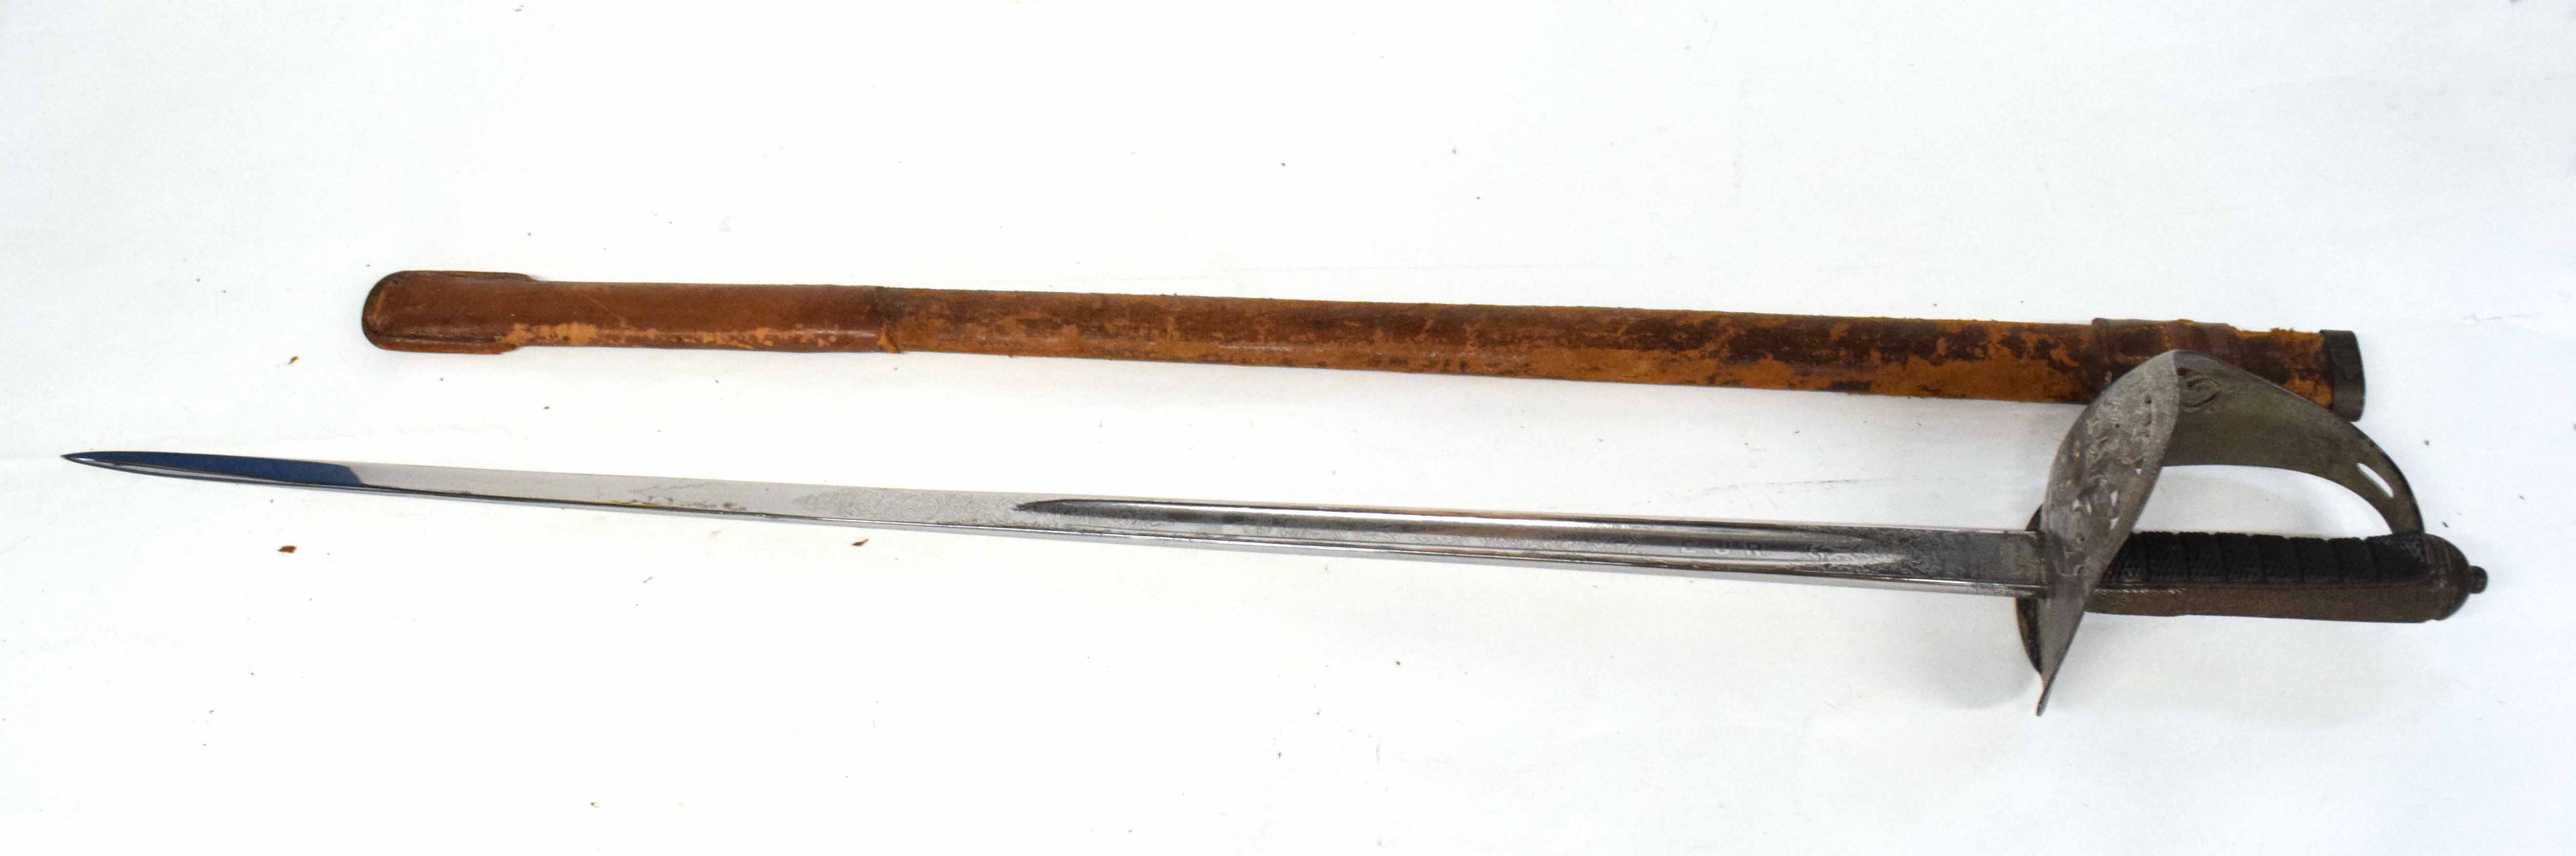 British 1897 pattern infantry officer's sword, King Edward period (1901-1910) with leather scabbard, - Image 5 of 11